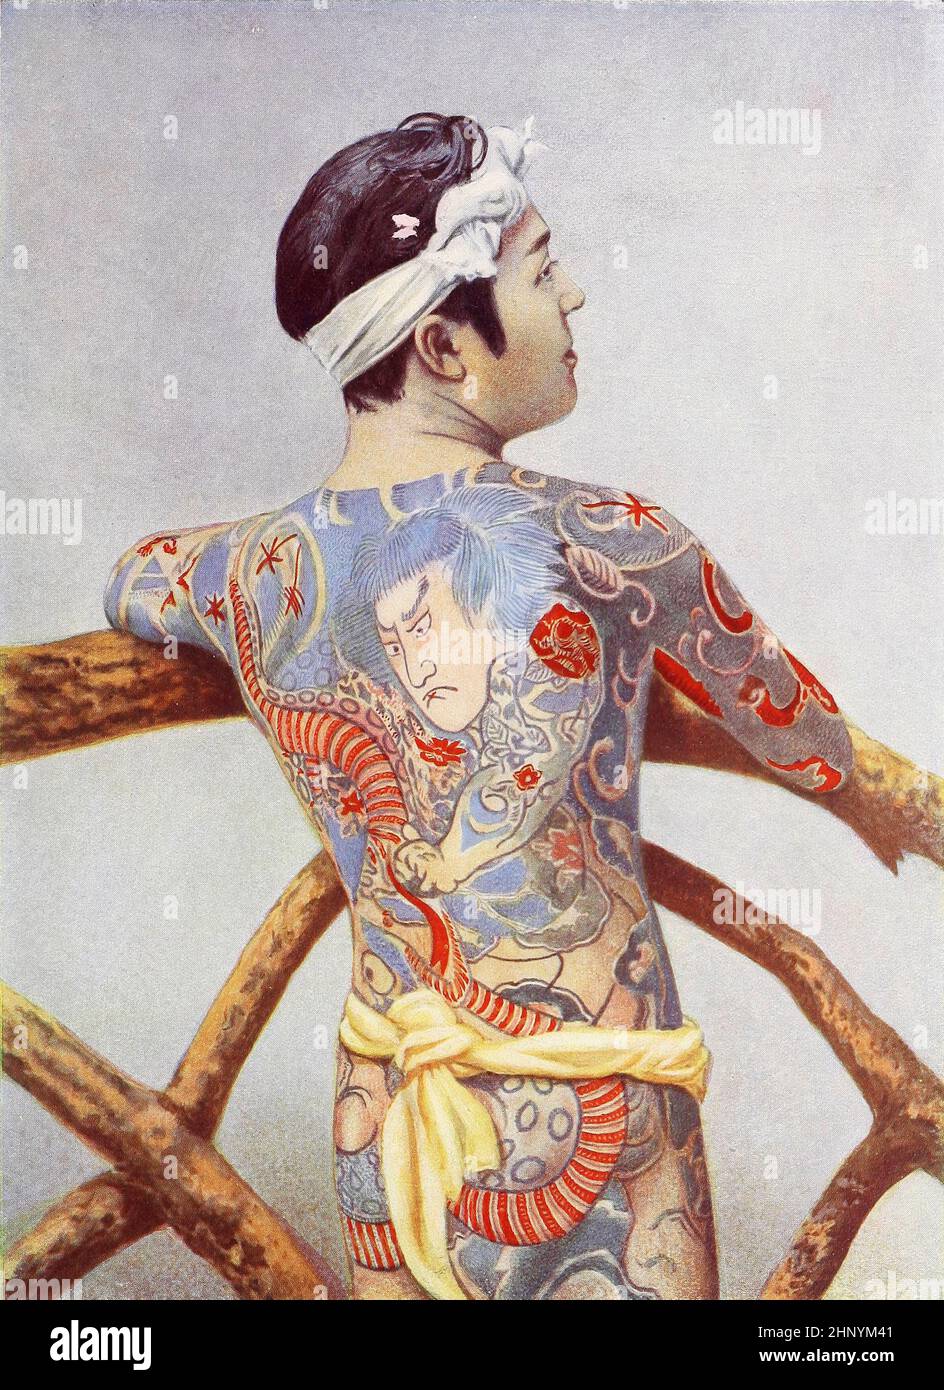 T.O.T back Japanese tattoo (Available in black or red) | Trend-on-tats